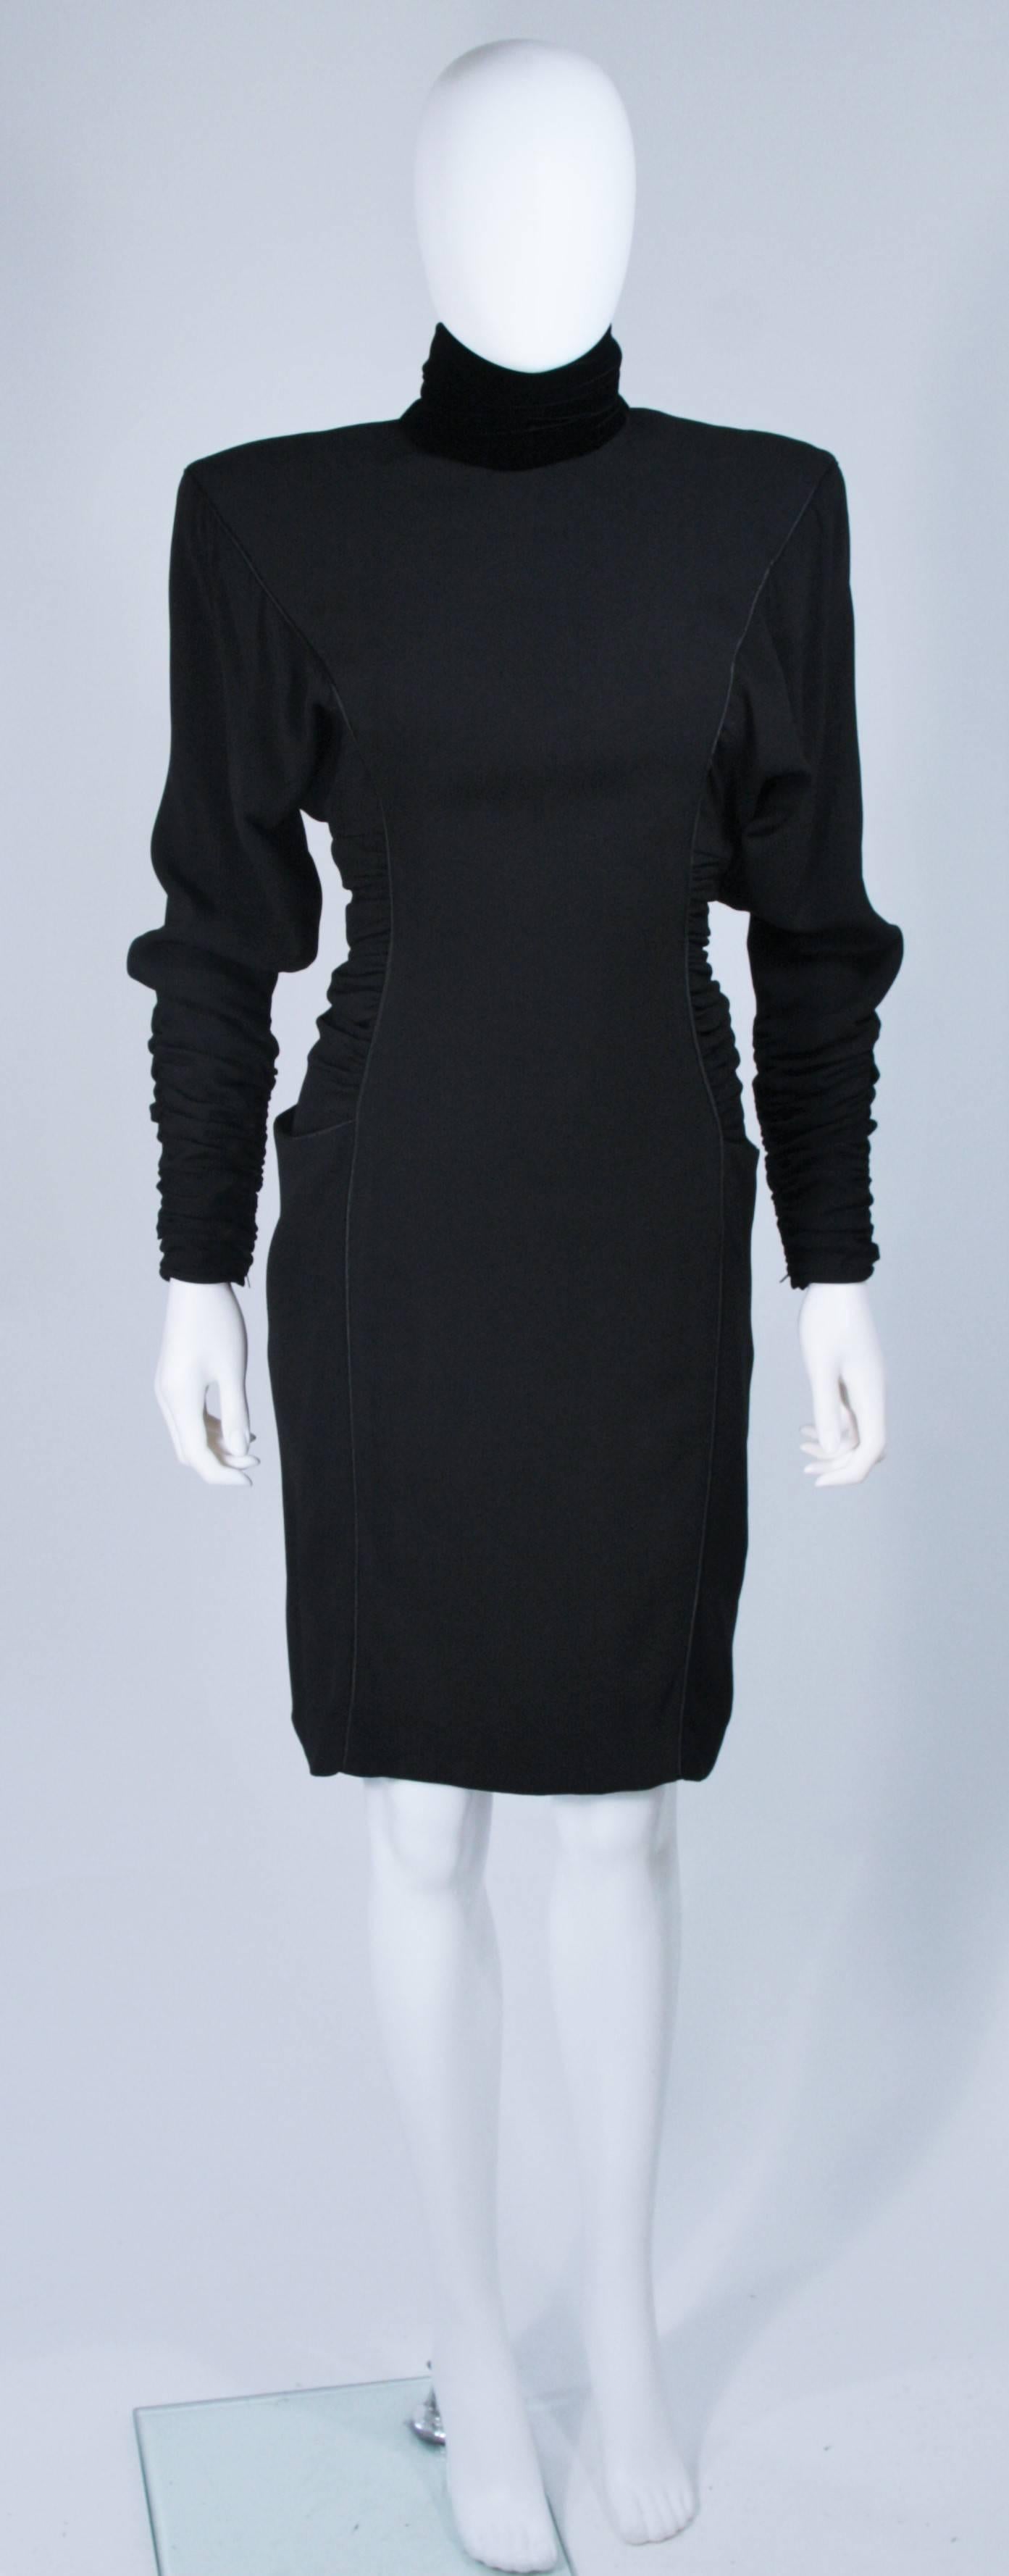  This Emanuel Ungaro dress is composed of a black silk with princess piping details and features a velvet mock collar. There is rouching and gathering at the sides and sleeves. Side pockets and a center back closure with faceted black buttons. In